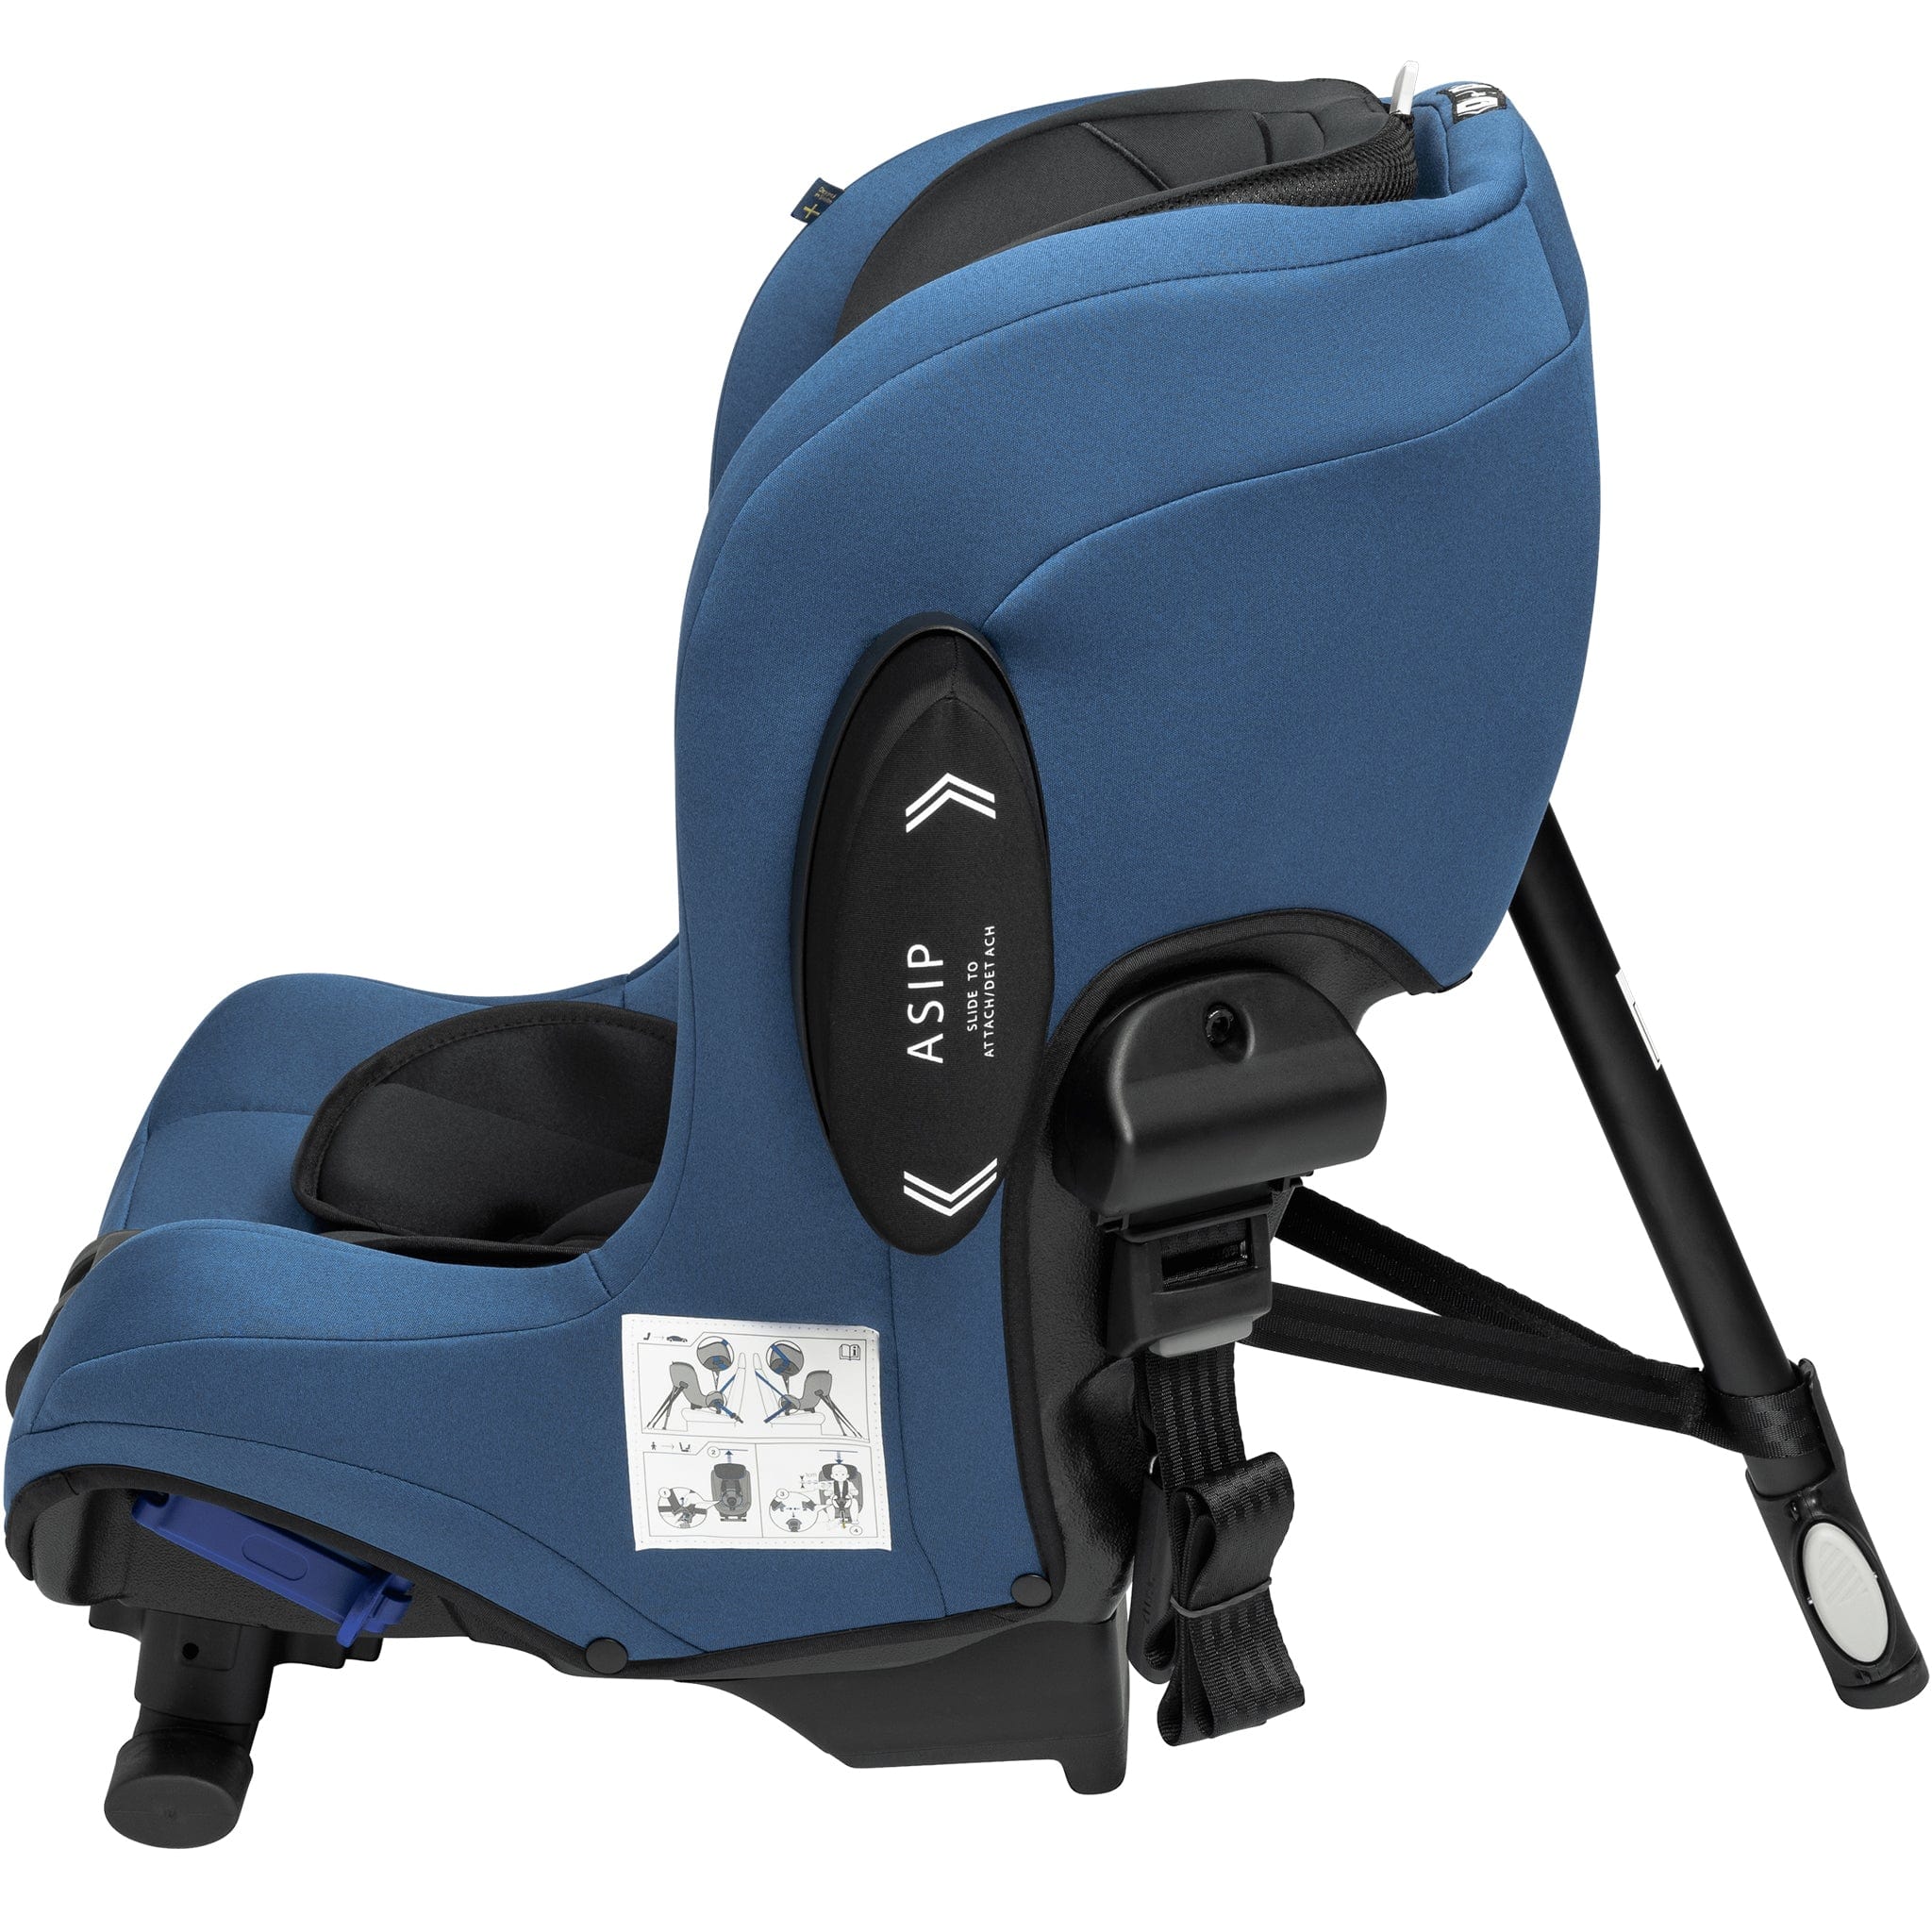 Axkid Minikid 2 - Sea With Free Wedge Extended Rear Facing Car Seats 10524-SEA 7350057585900